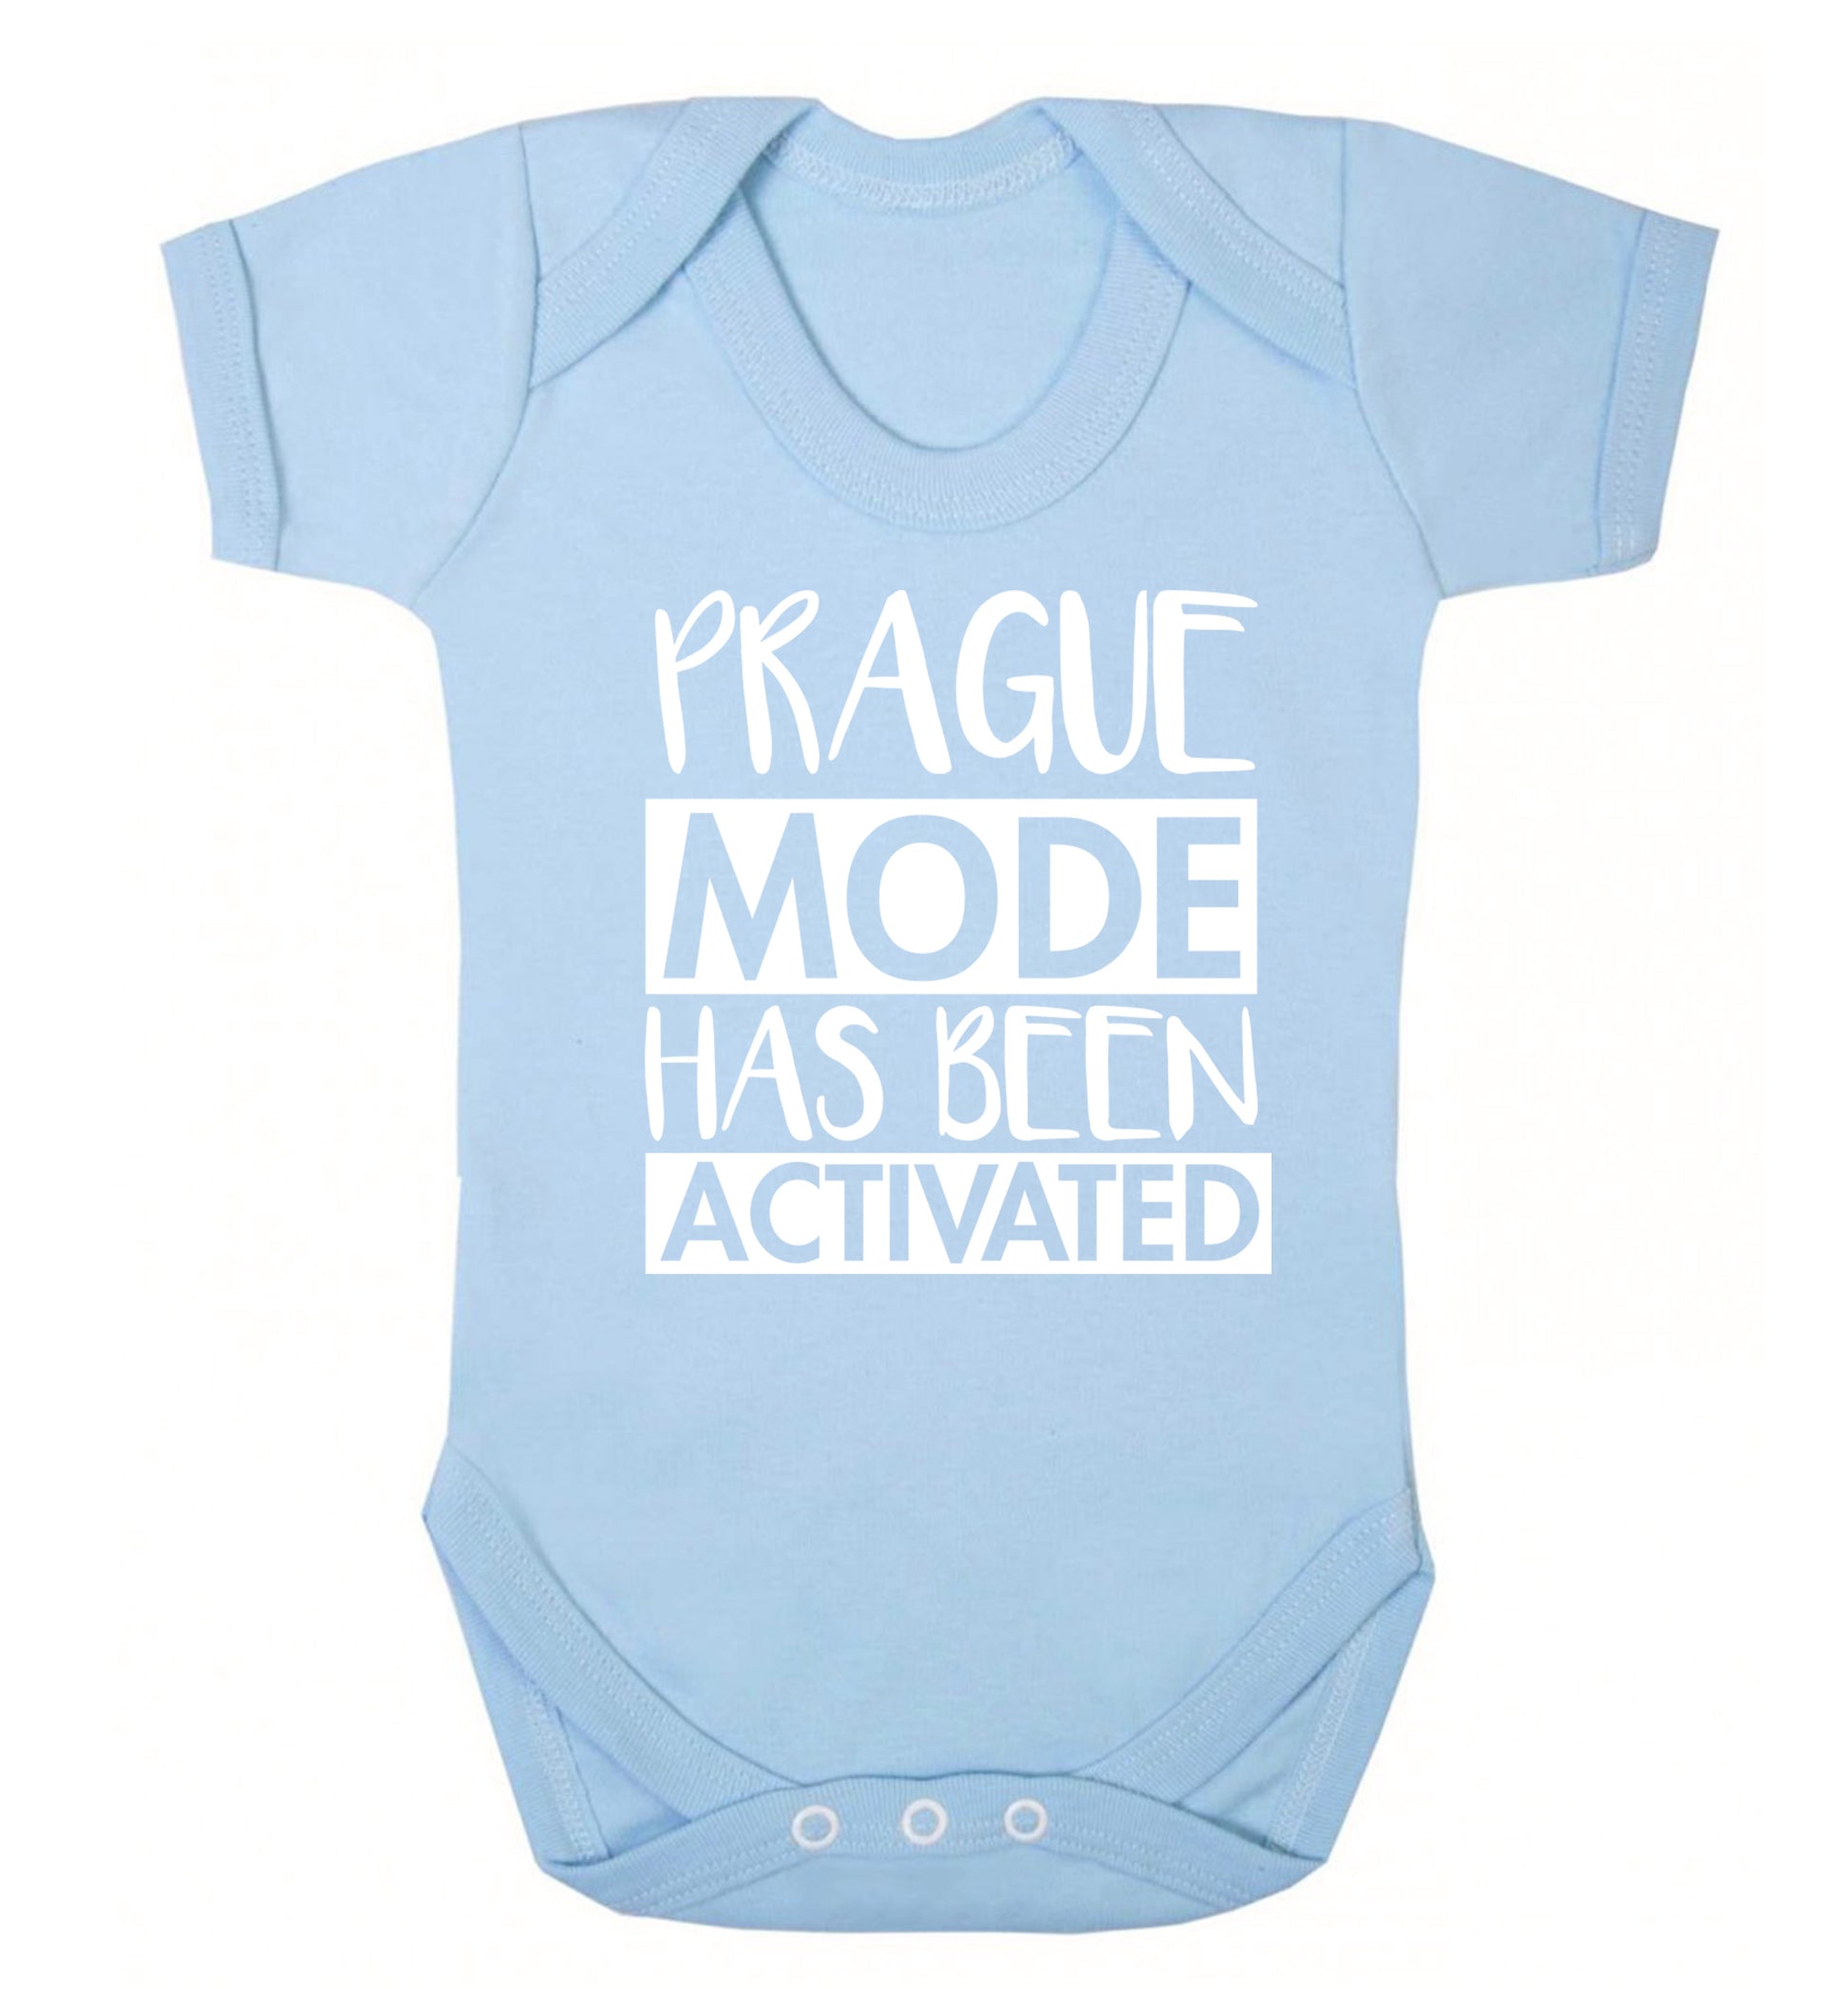 Prague mode has been activated Baby Vest pale blue 18-24 months